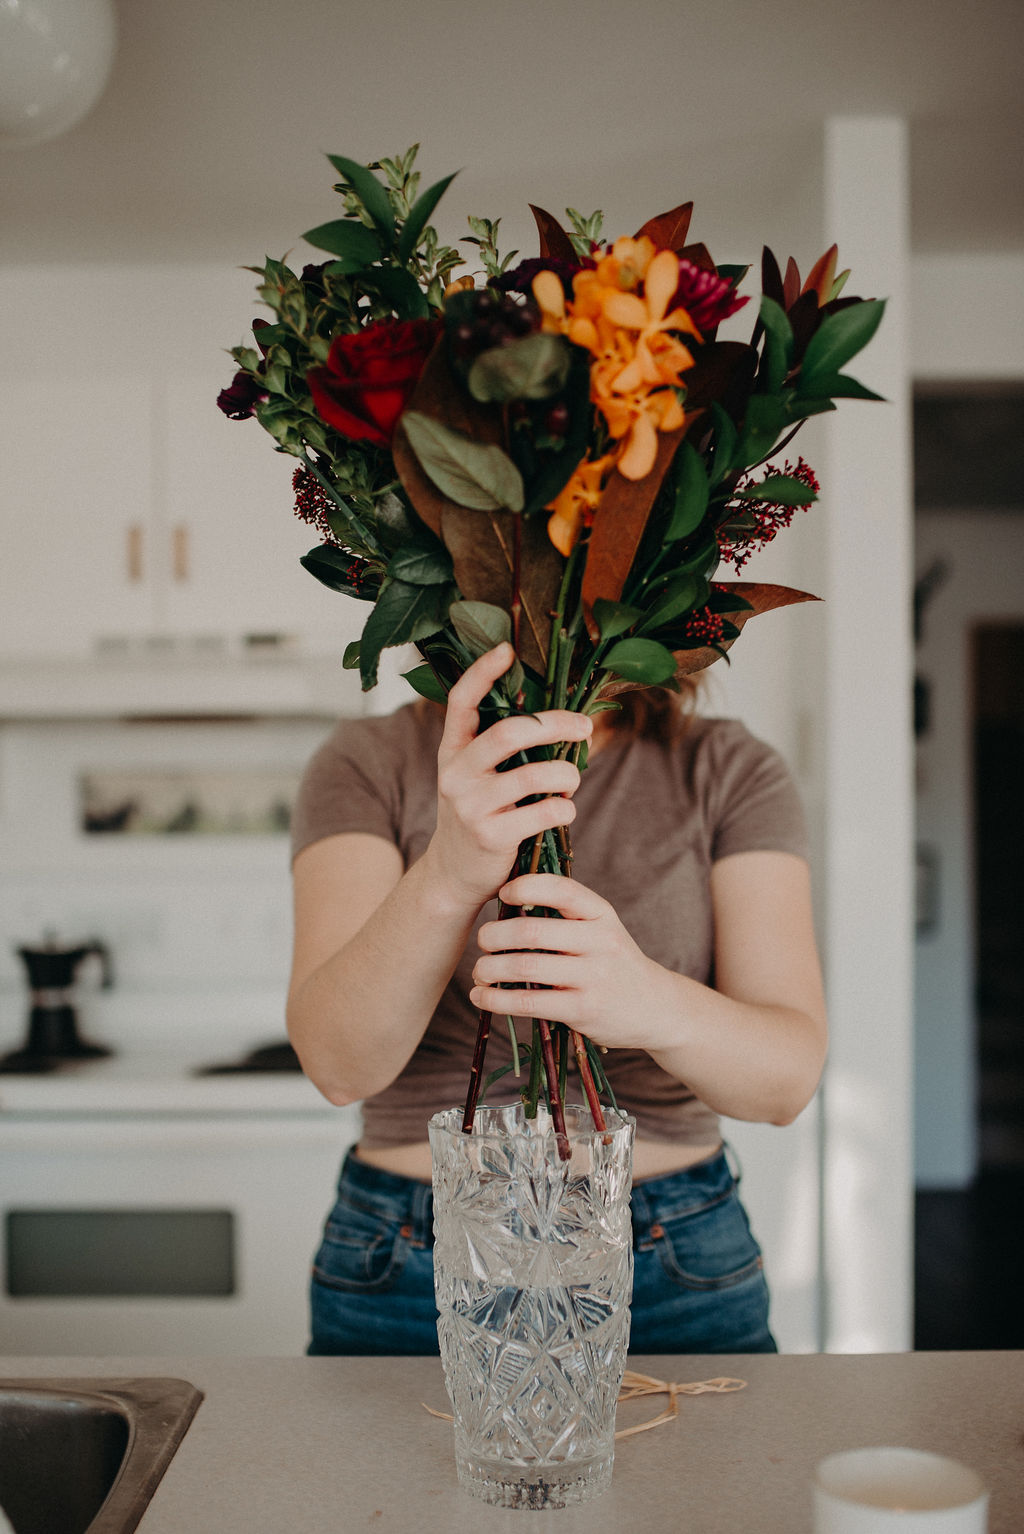 A woman holds a bouquet of flowers in front of her face.